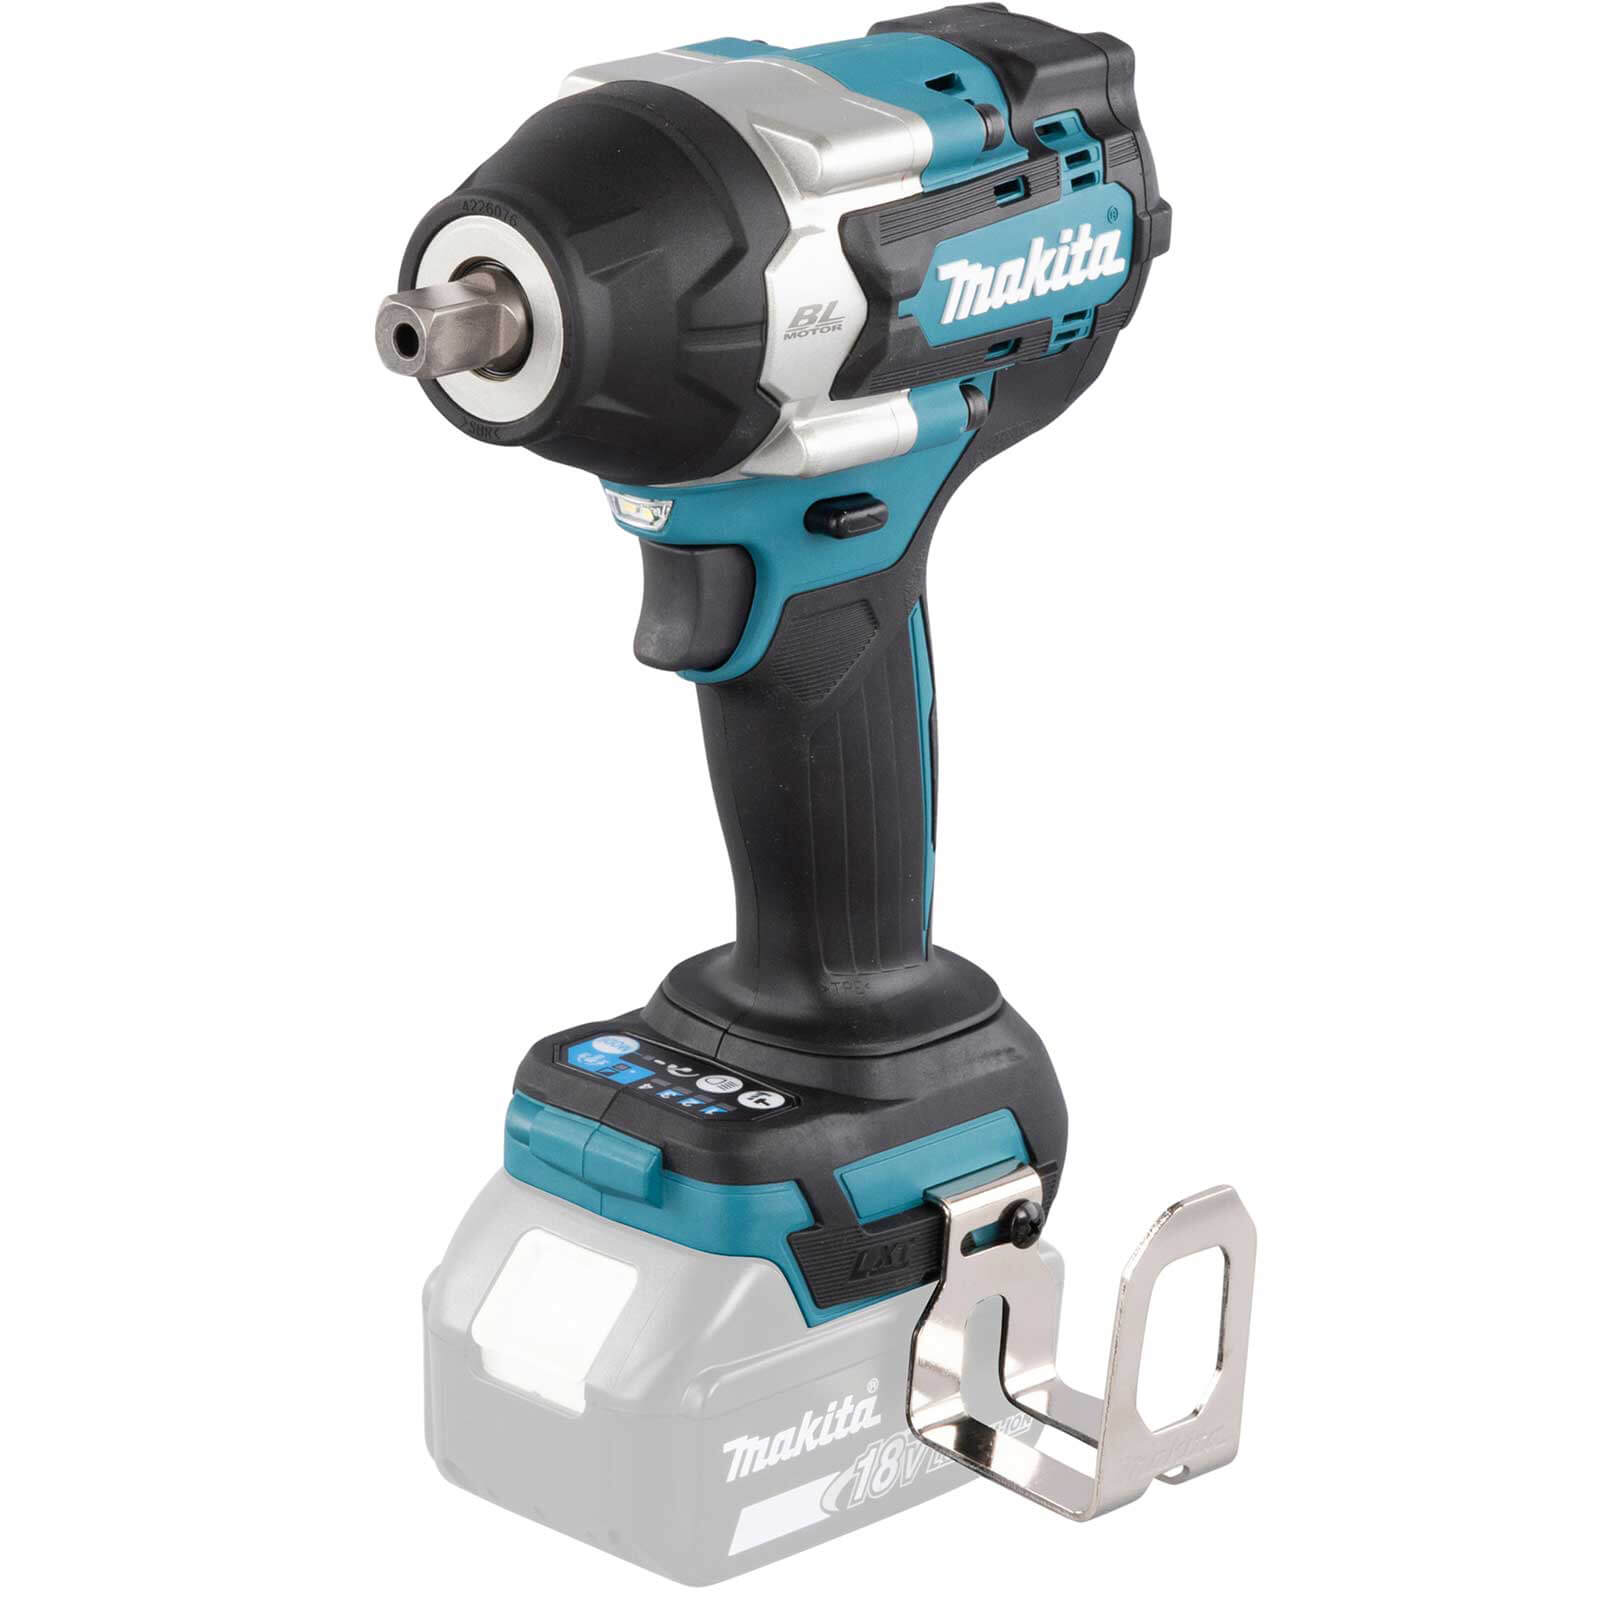 Image of Makita DTW701 18v LXT Cordless Brushless 1/2" Drive Impact Wrench No Batteries No Charger No Case